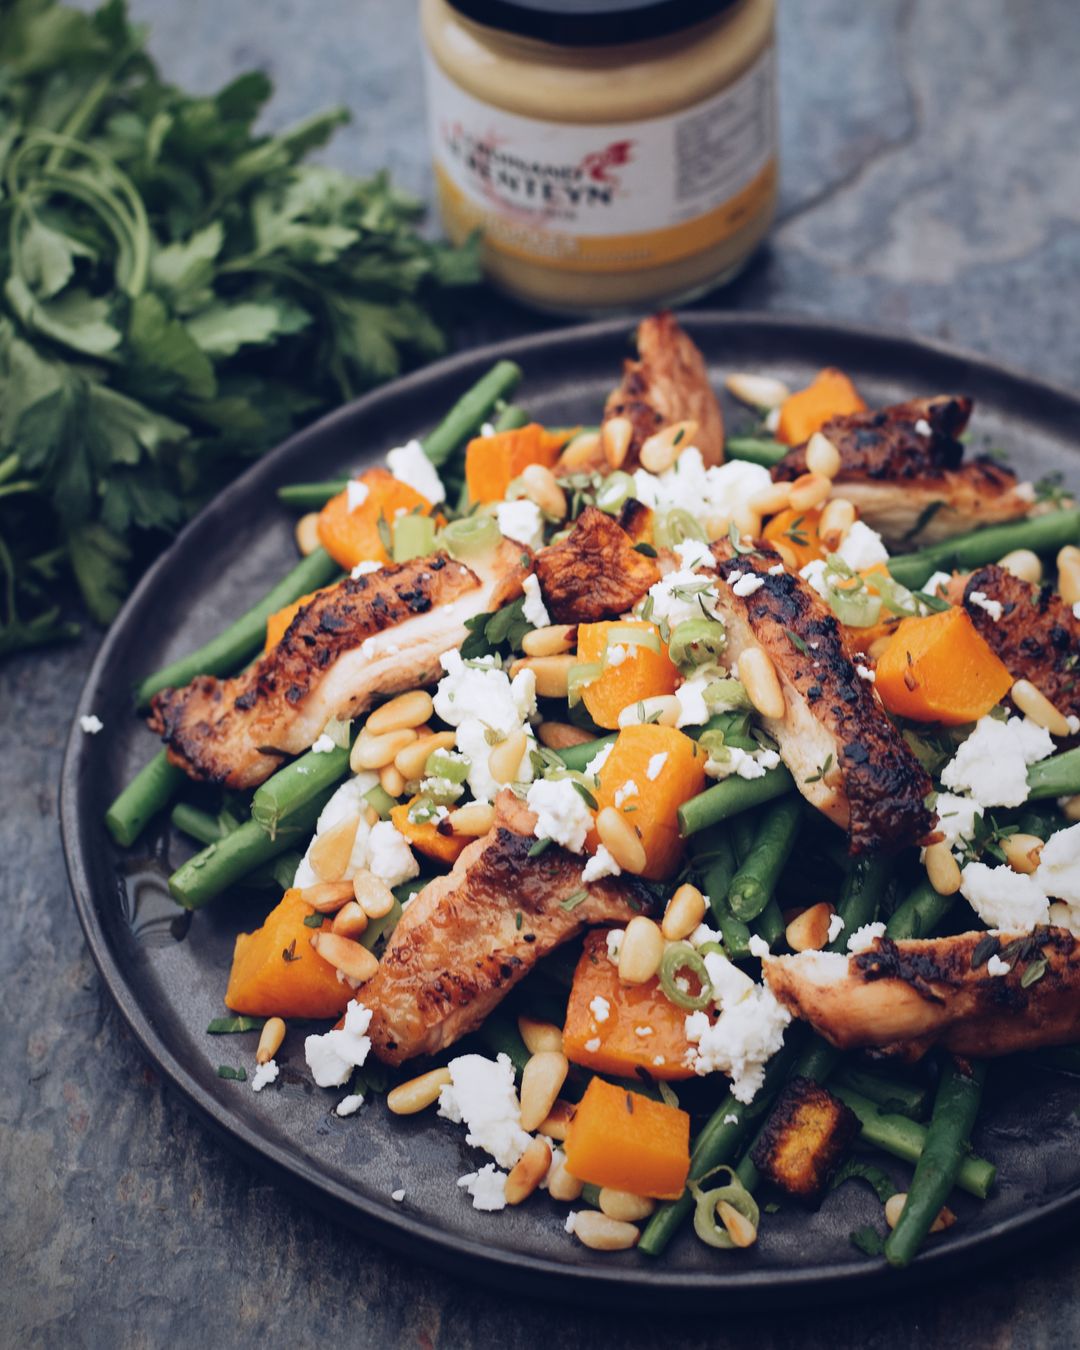 Mustard chicken with beans, roasted butternut, feta and pine nuts